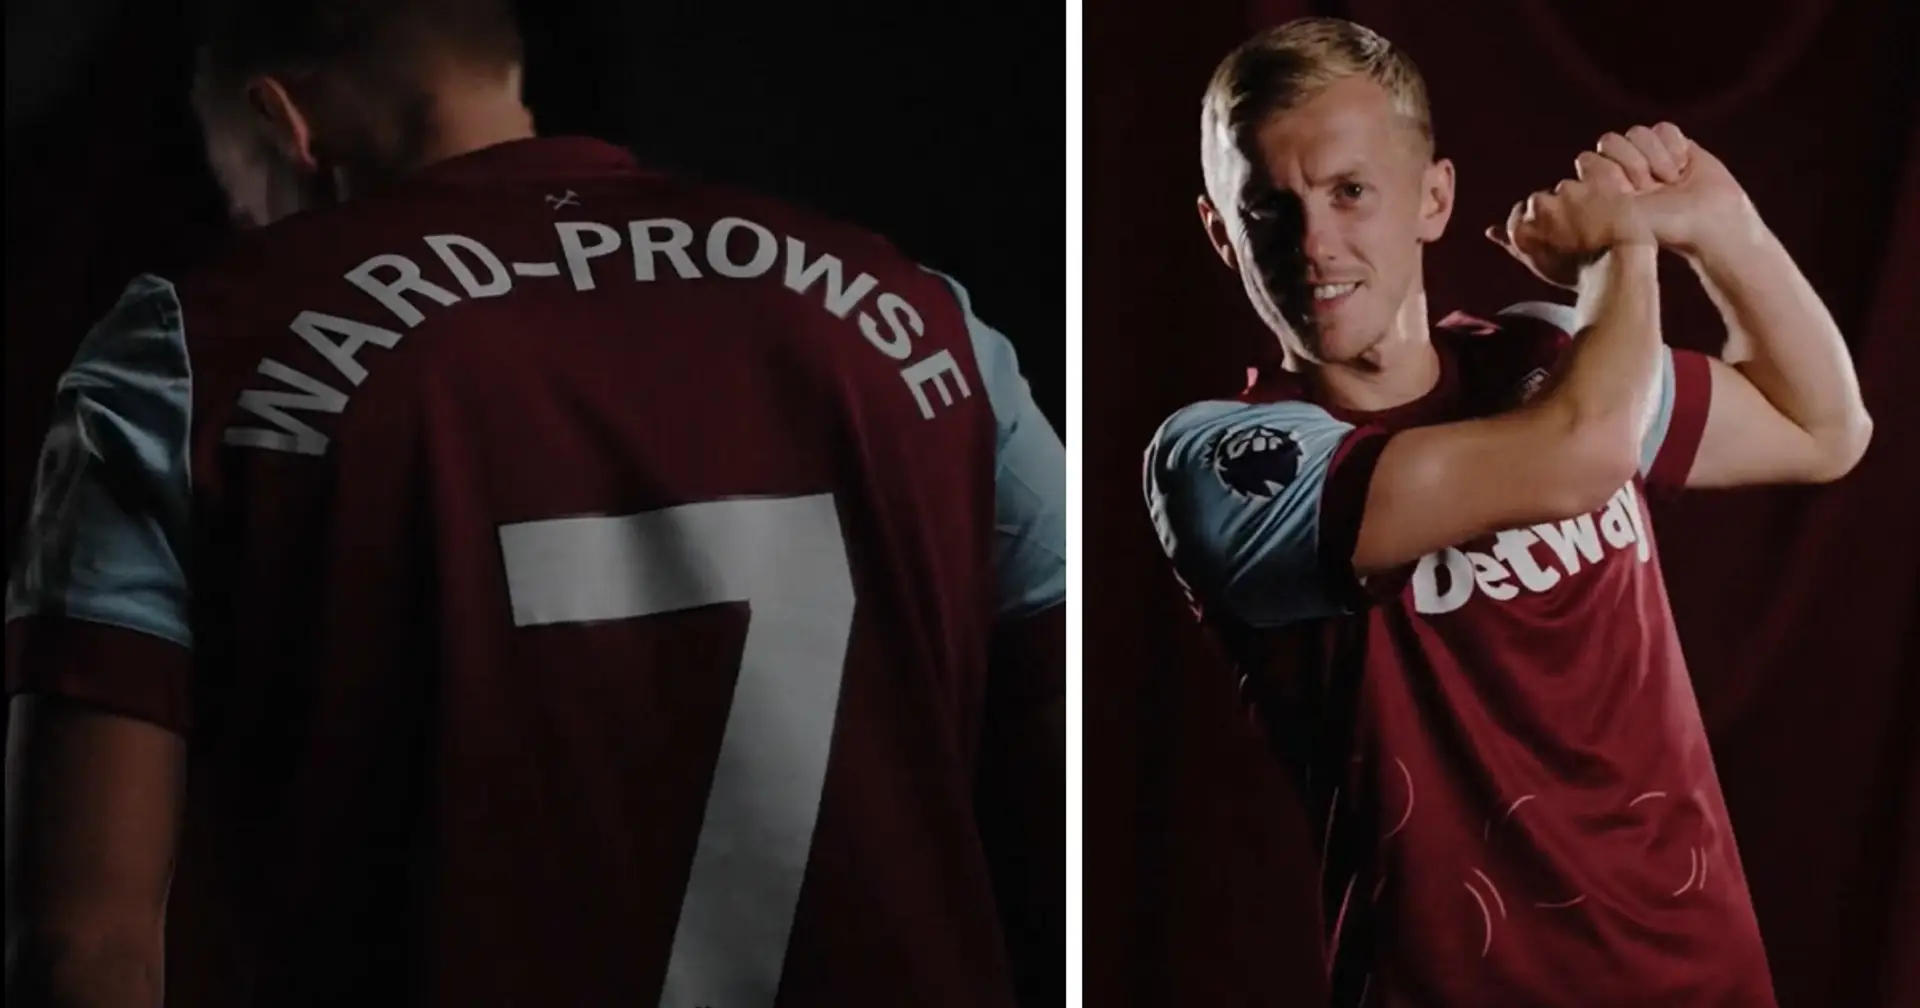 West Ham complete the signing of James Ward-Prowse